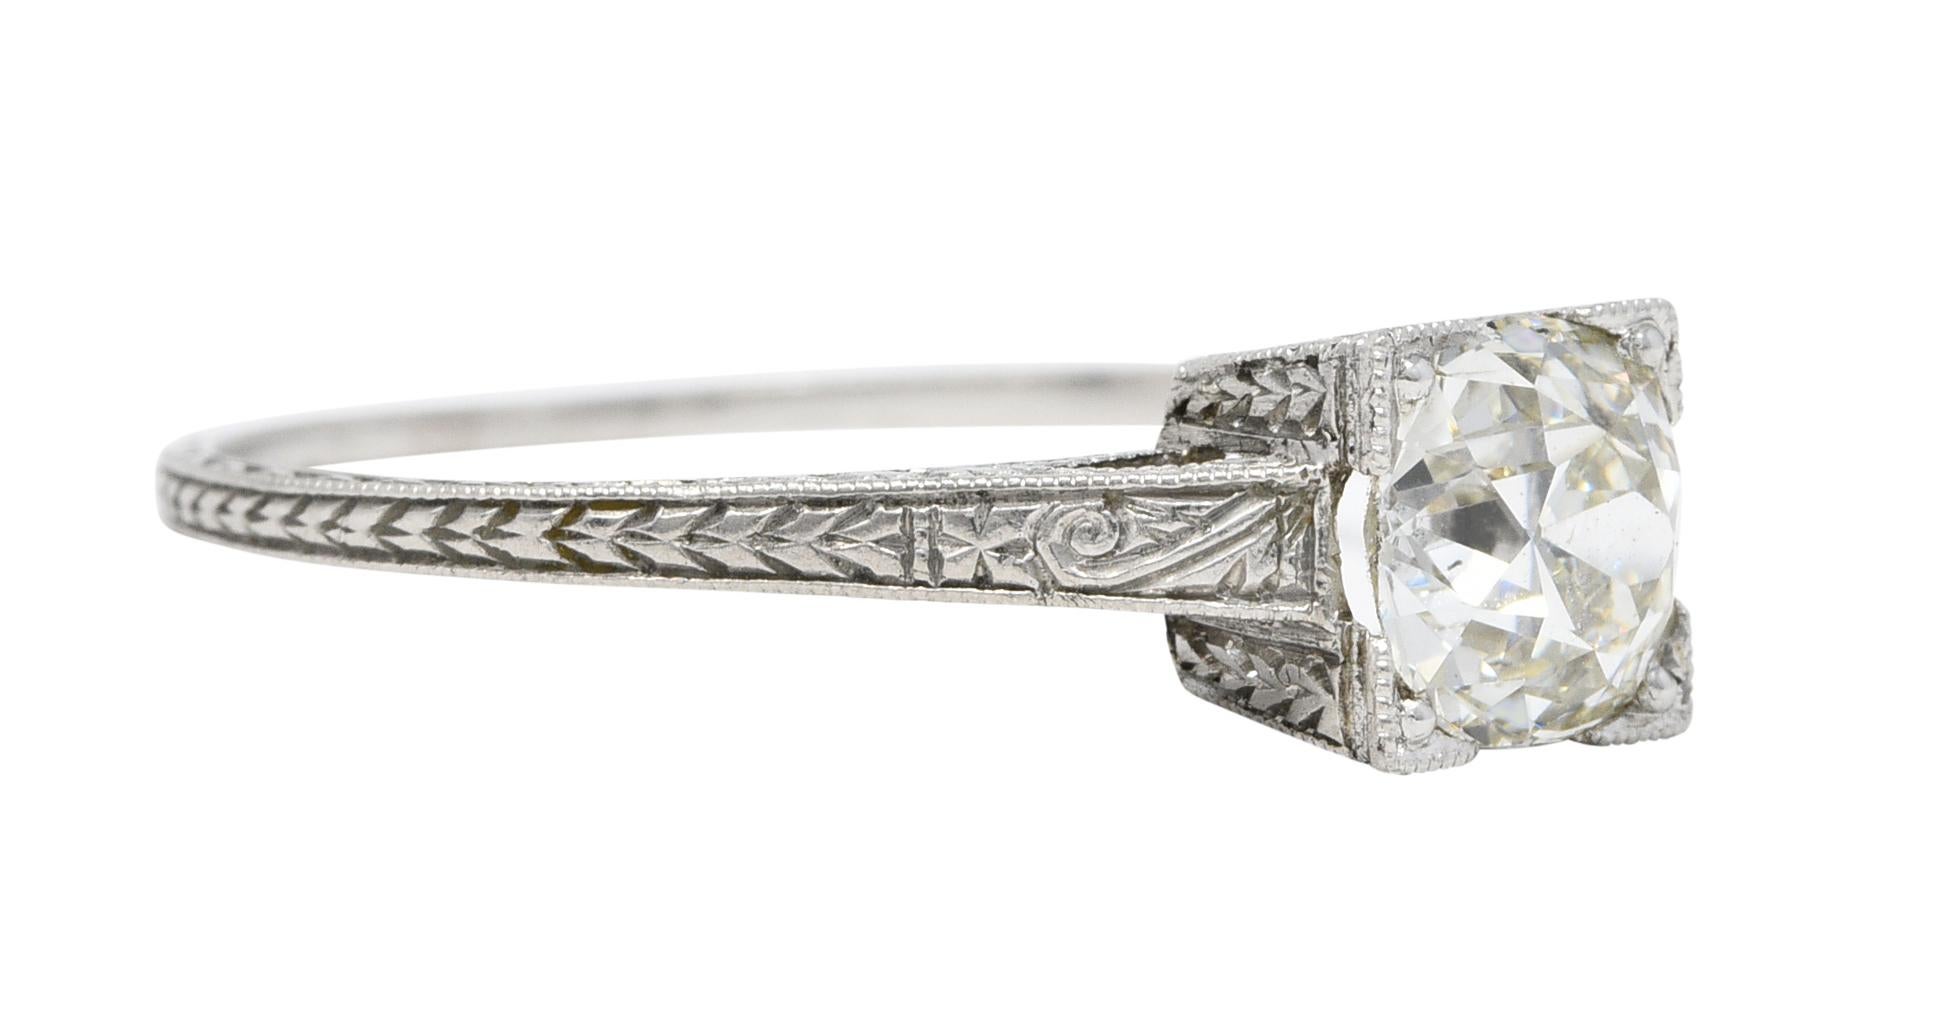 Featuring an old European cut diamond weighing approximately 1.00 carat - K color with SI1 clarity

Set in a square form head and flanked by subtle cathedral shoulders

Engraved throughout with a stylized wheat motif

Tested as platinum

Circa: